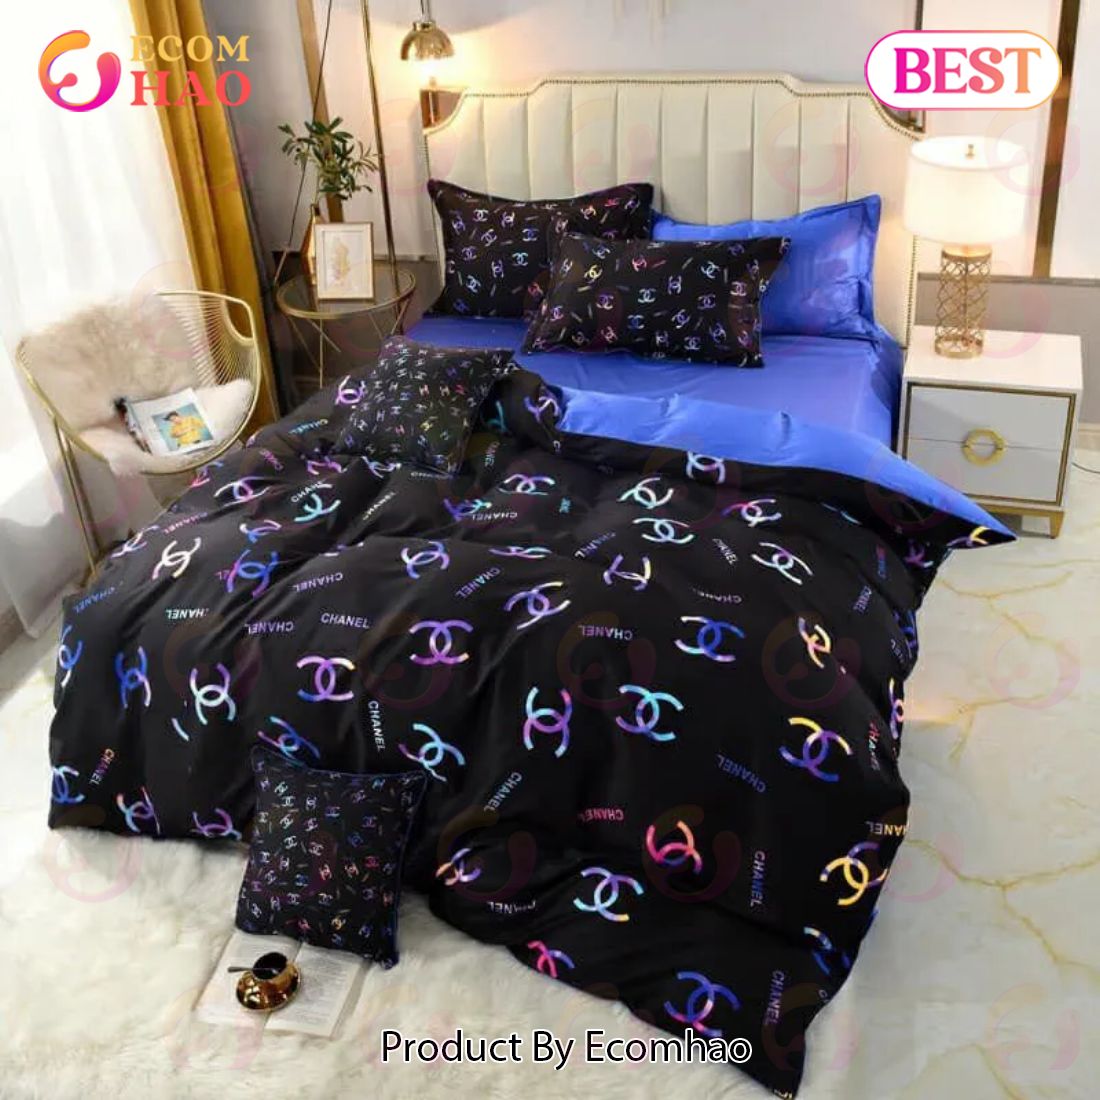 Colorful Black Chanel Bedding Sets Luxury Brand Bed Sets Bedroom Sets  Comforter Sets Duvet Cover Bedspread For Home Dcor Trending 2023 For Home -  Ecomhao Store